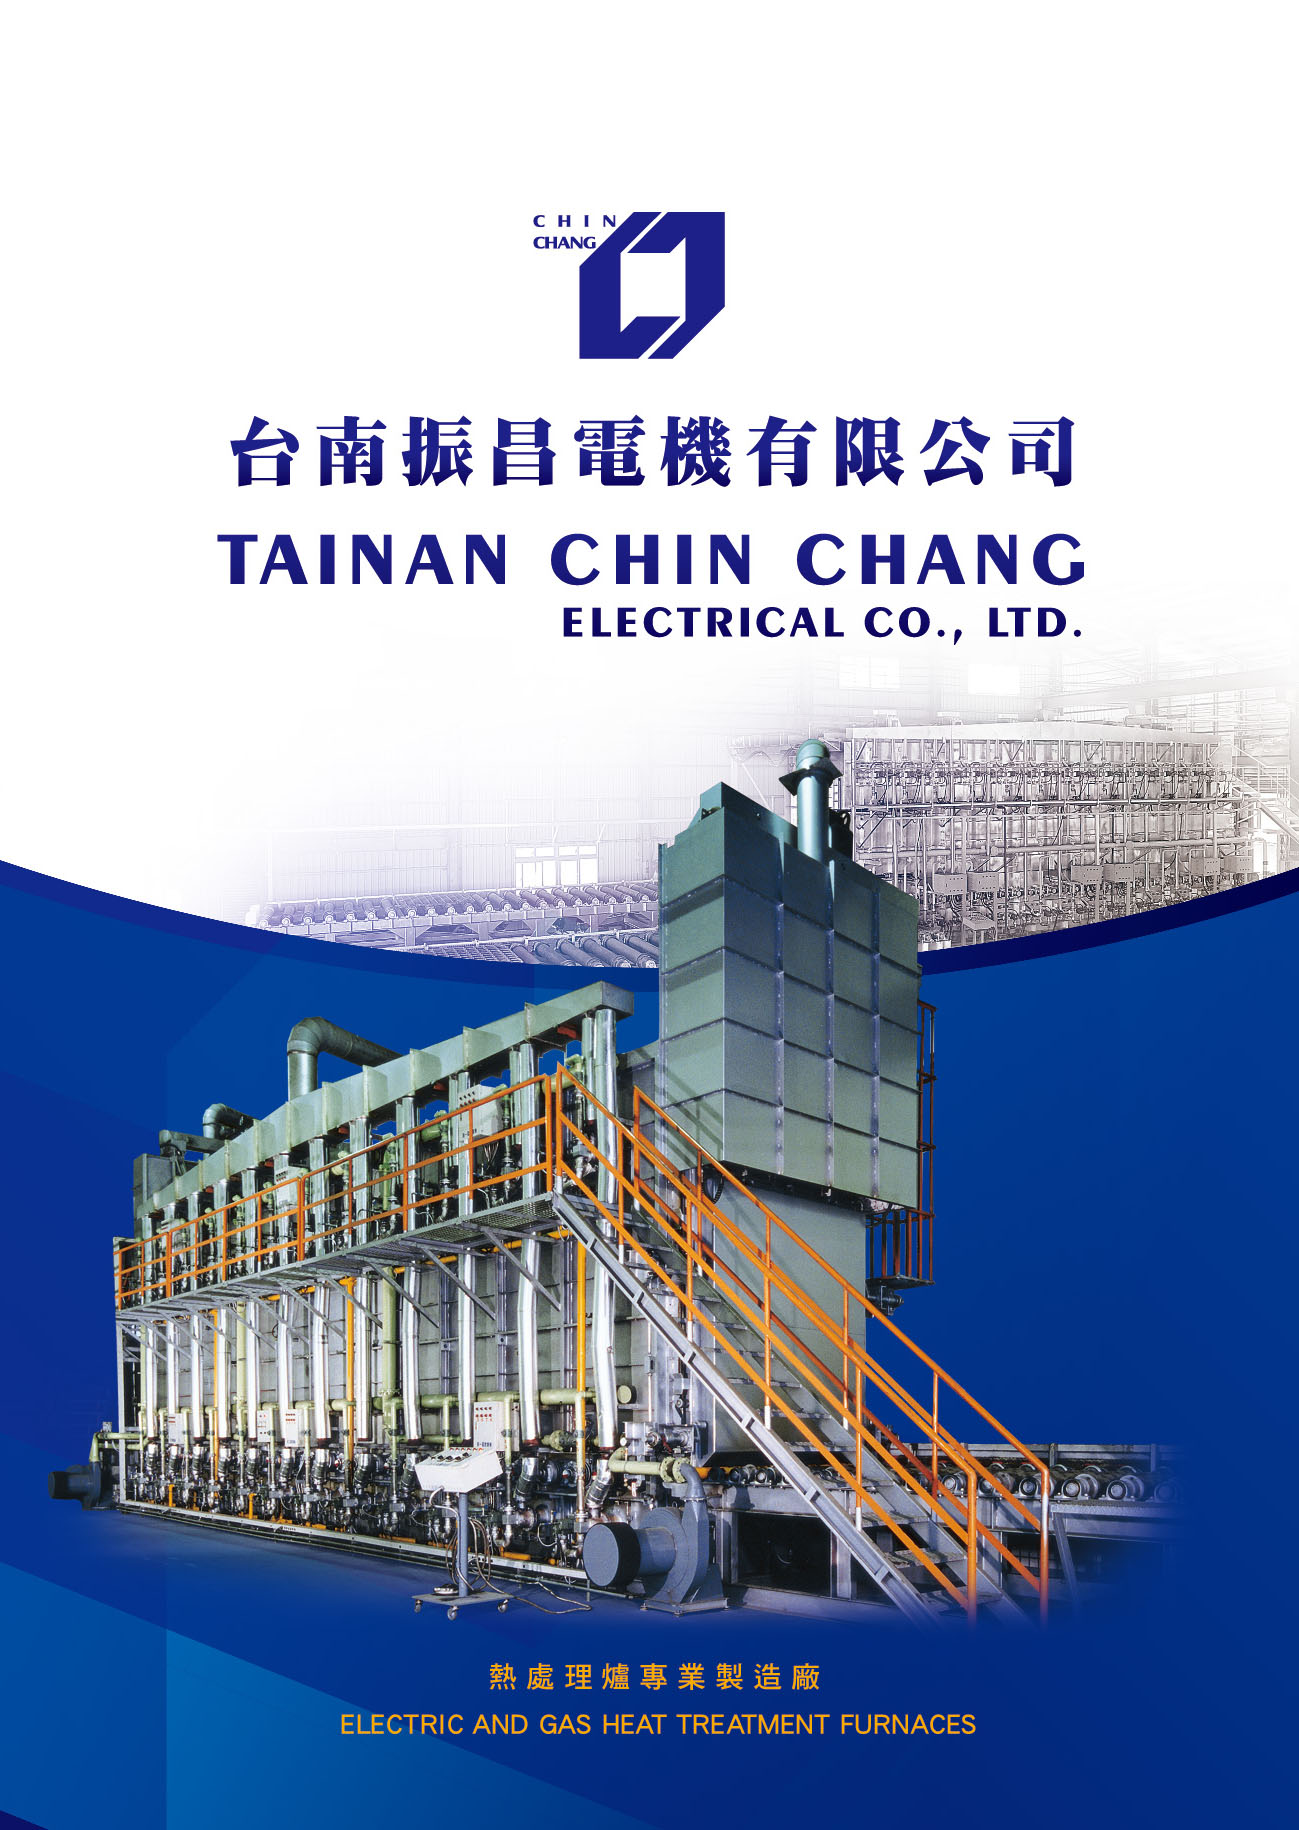 TAINAN CHIN CHANG ELECTRICAL CO., LTD. _Online Catalogues